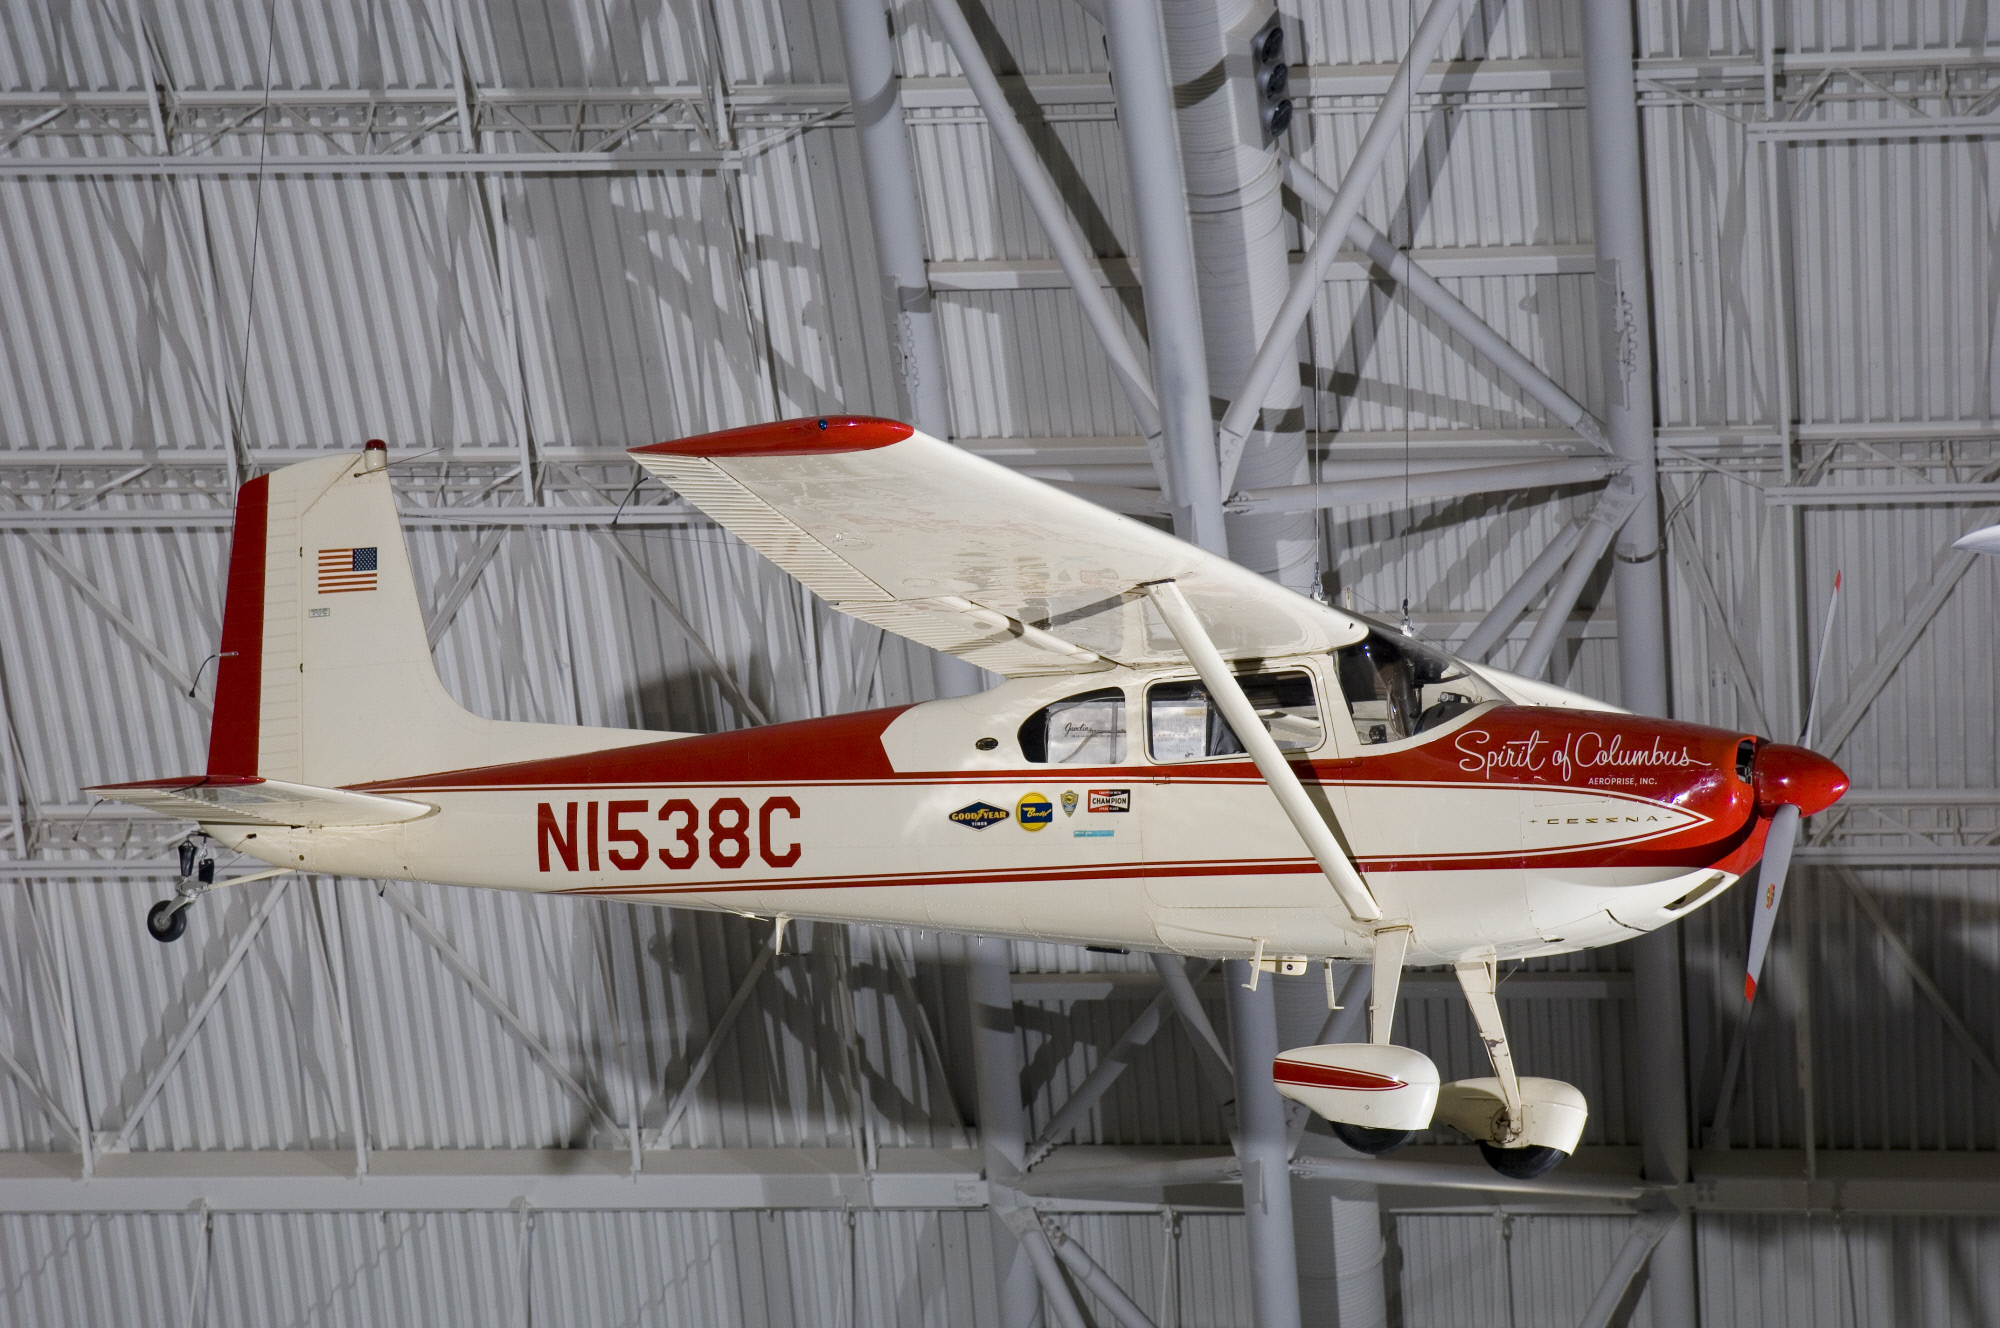 1953 Cessna 180, N1538C, Spirit of Columbus, on display at the Steven F. Udvar-Hazy Center. (National Air and Space Museum, Smithsonian Institution)